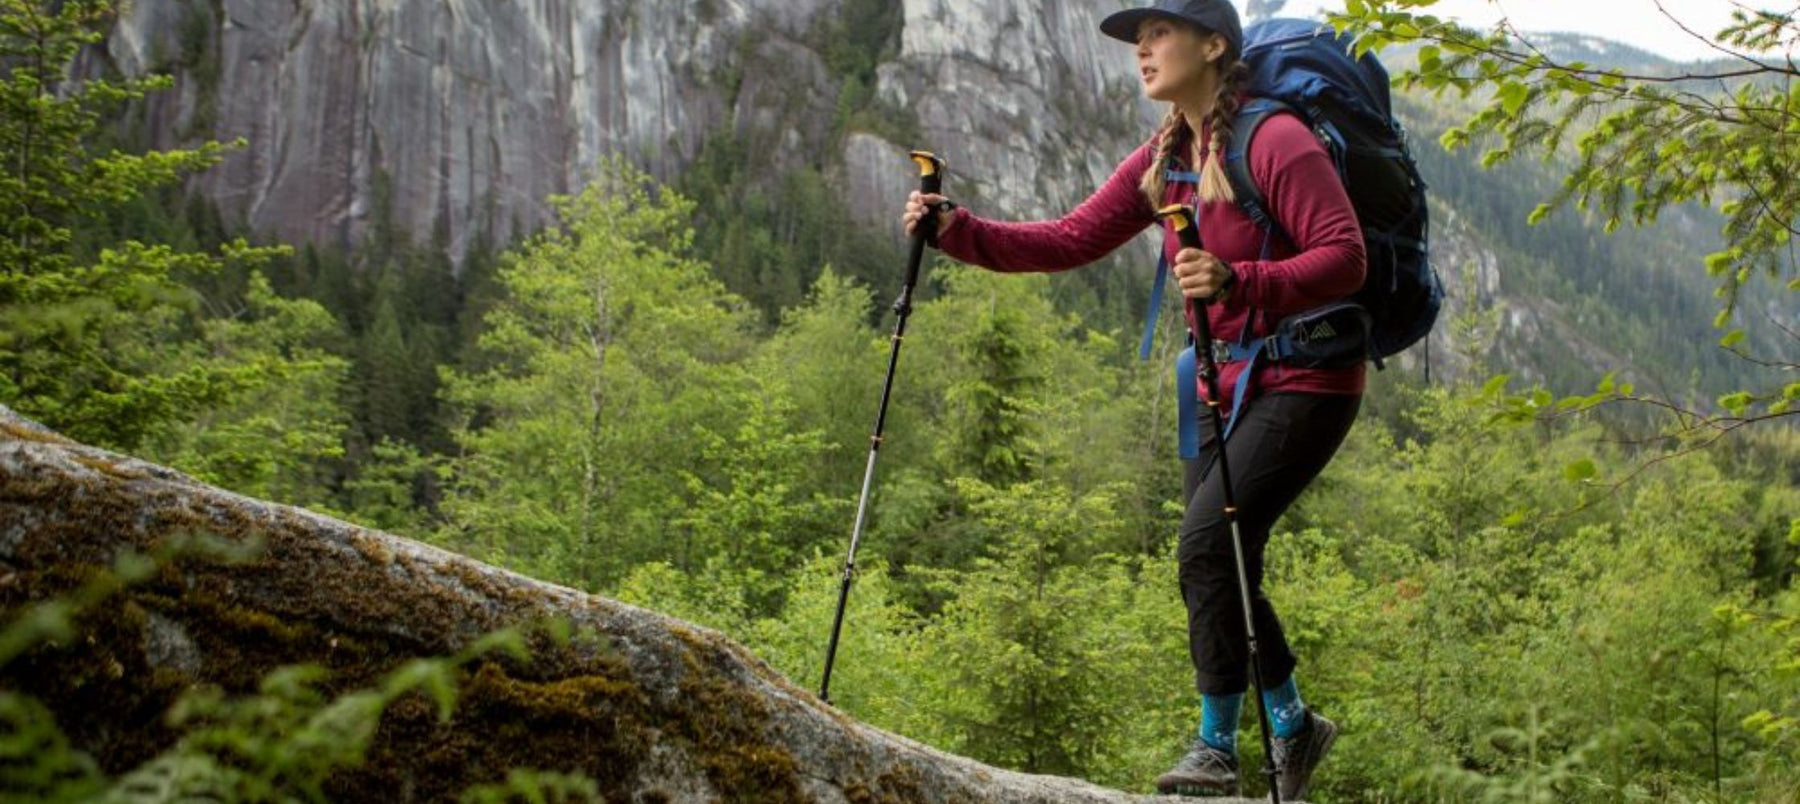 woman hiking with poles and backpack in forest